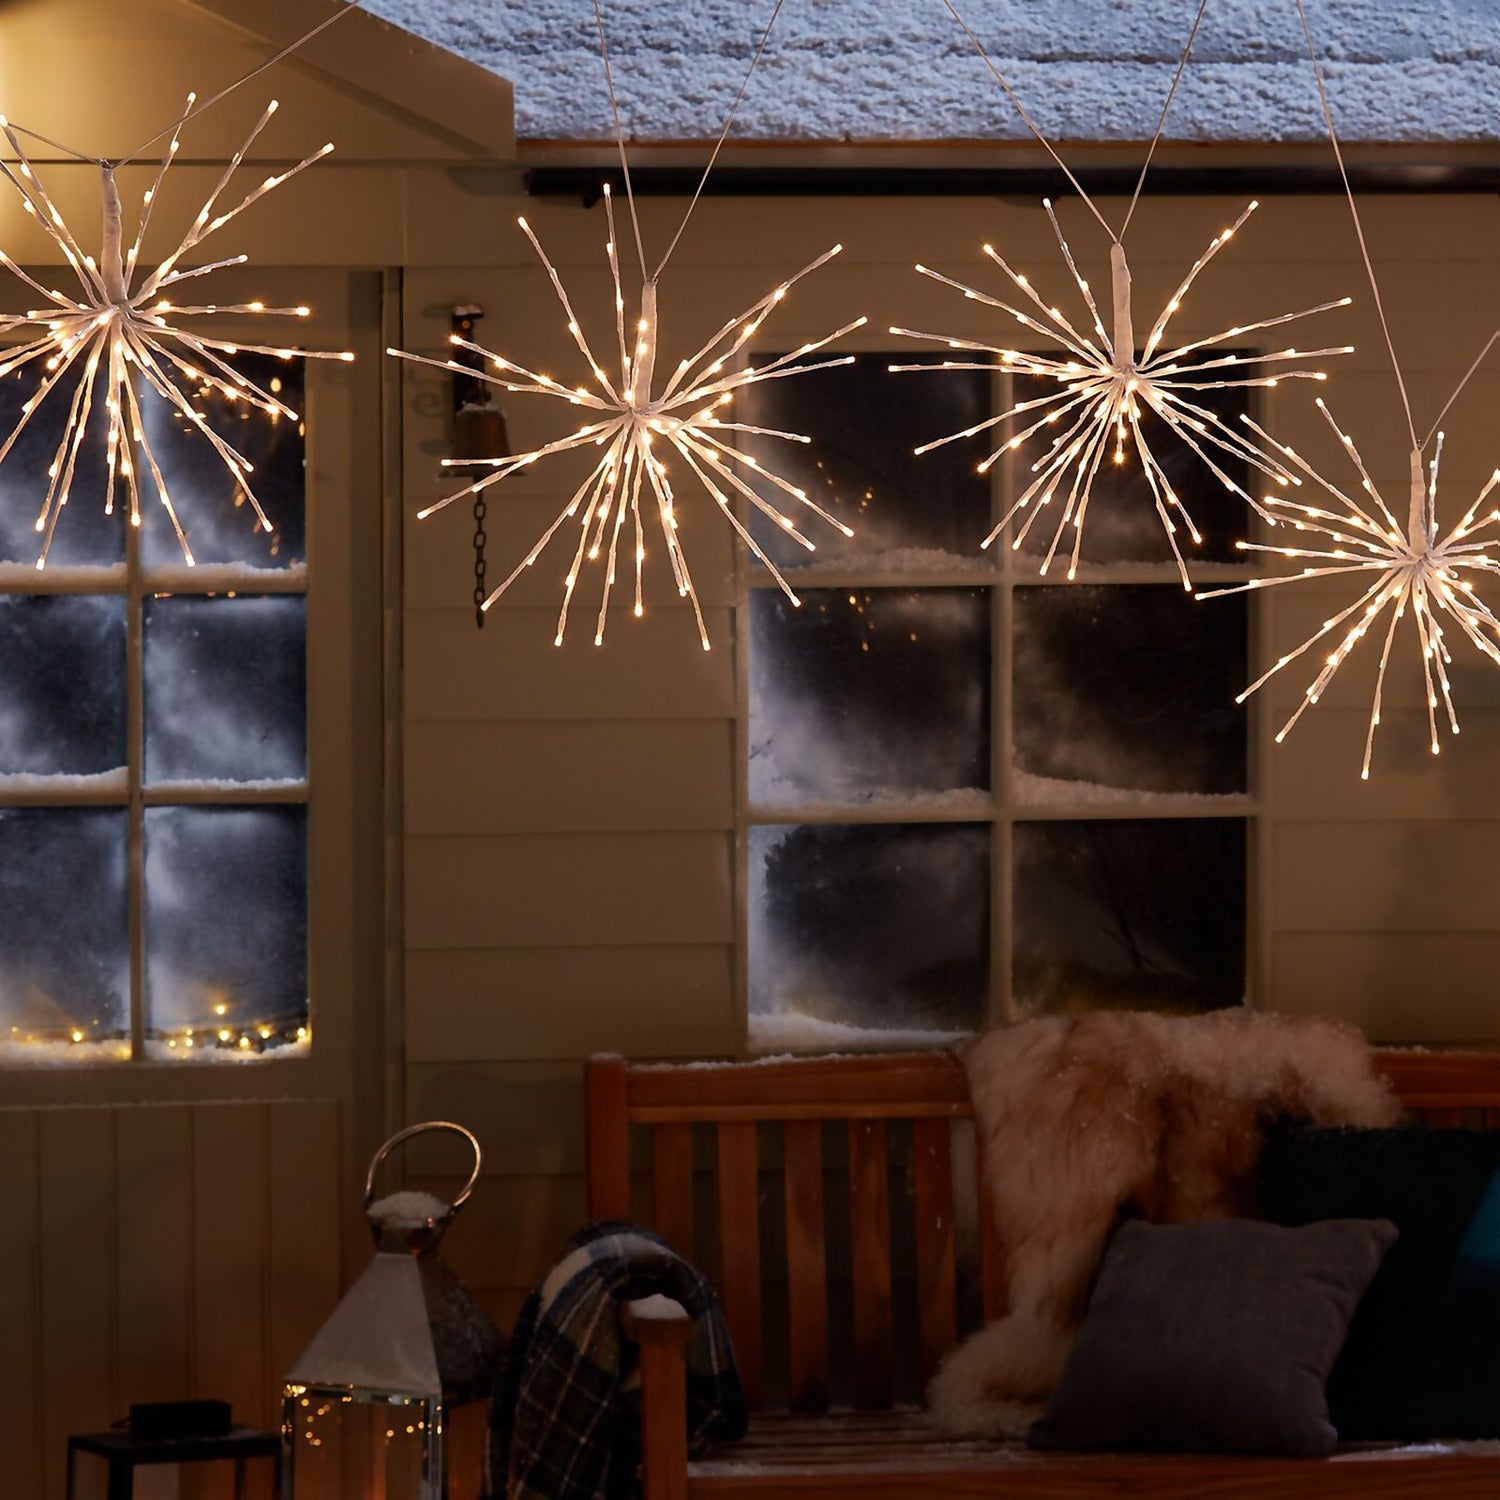 White North Star LED Outdoor Christmas String Lights - Set of 4